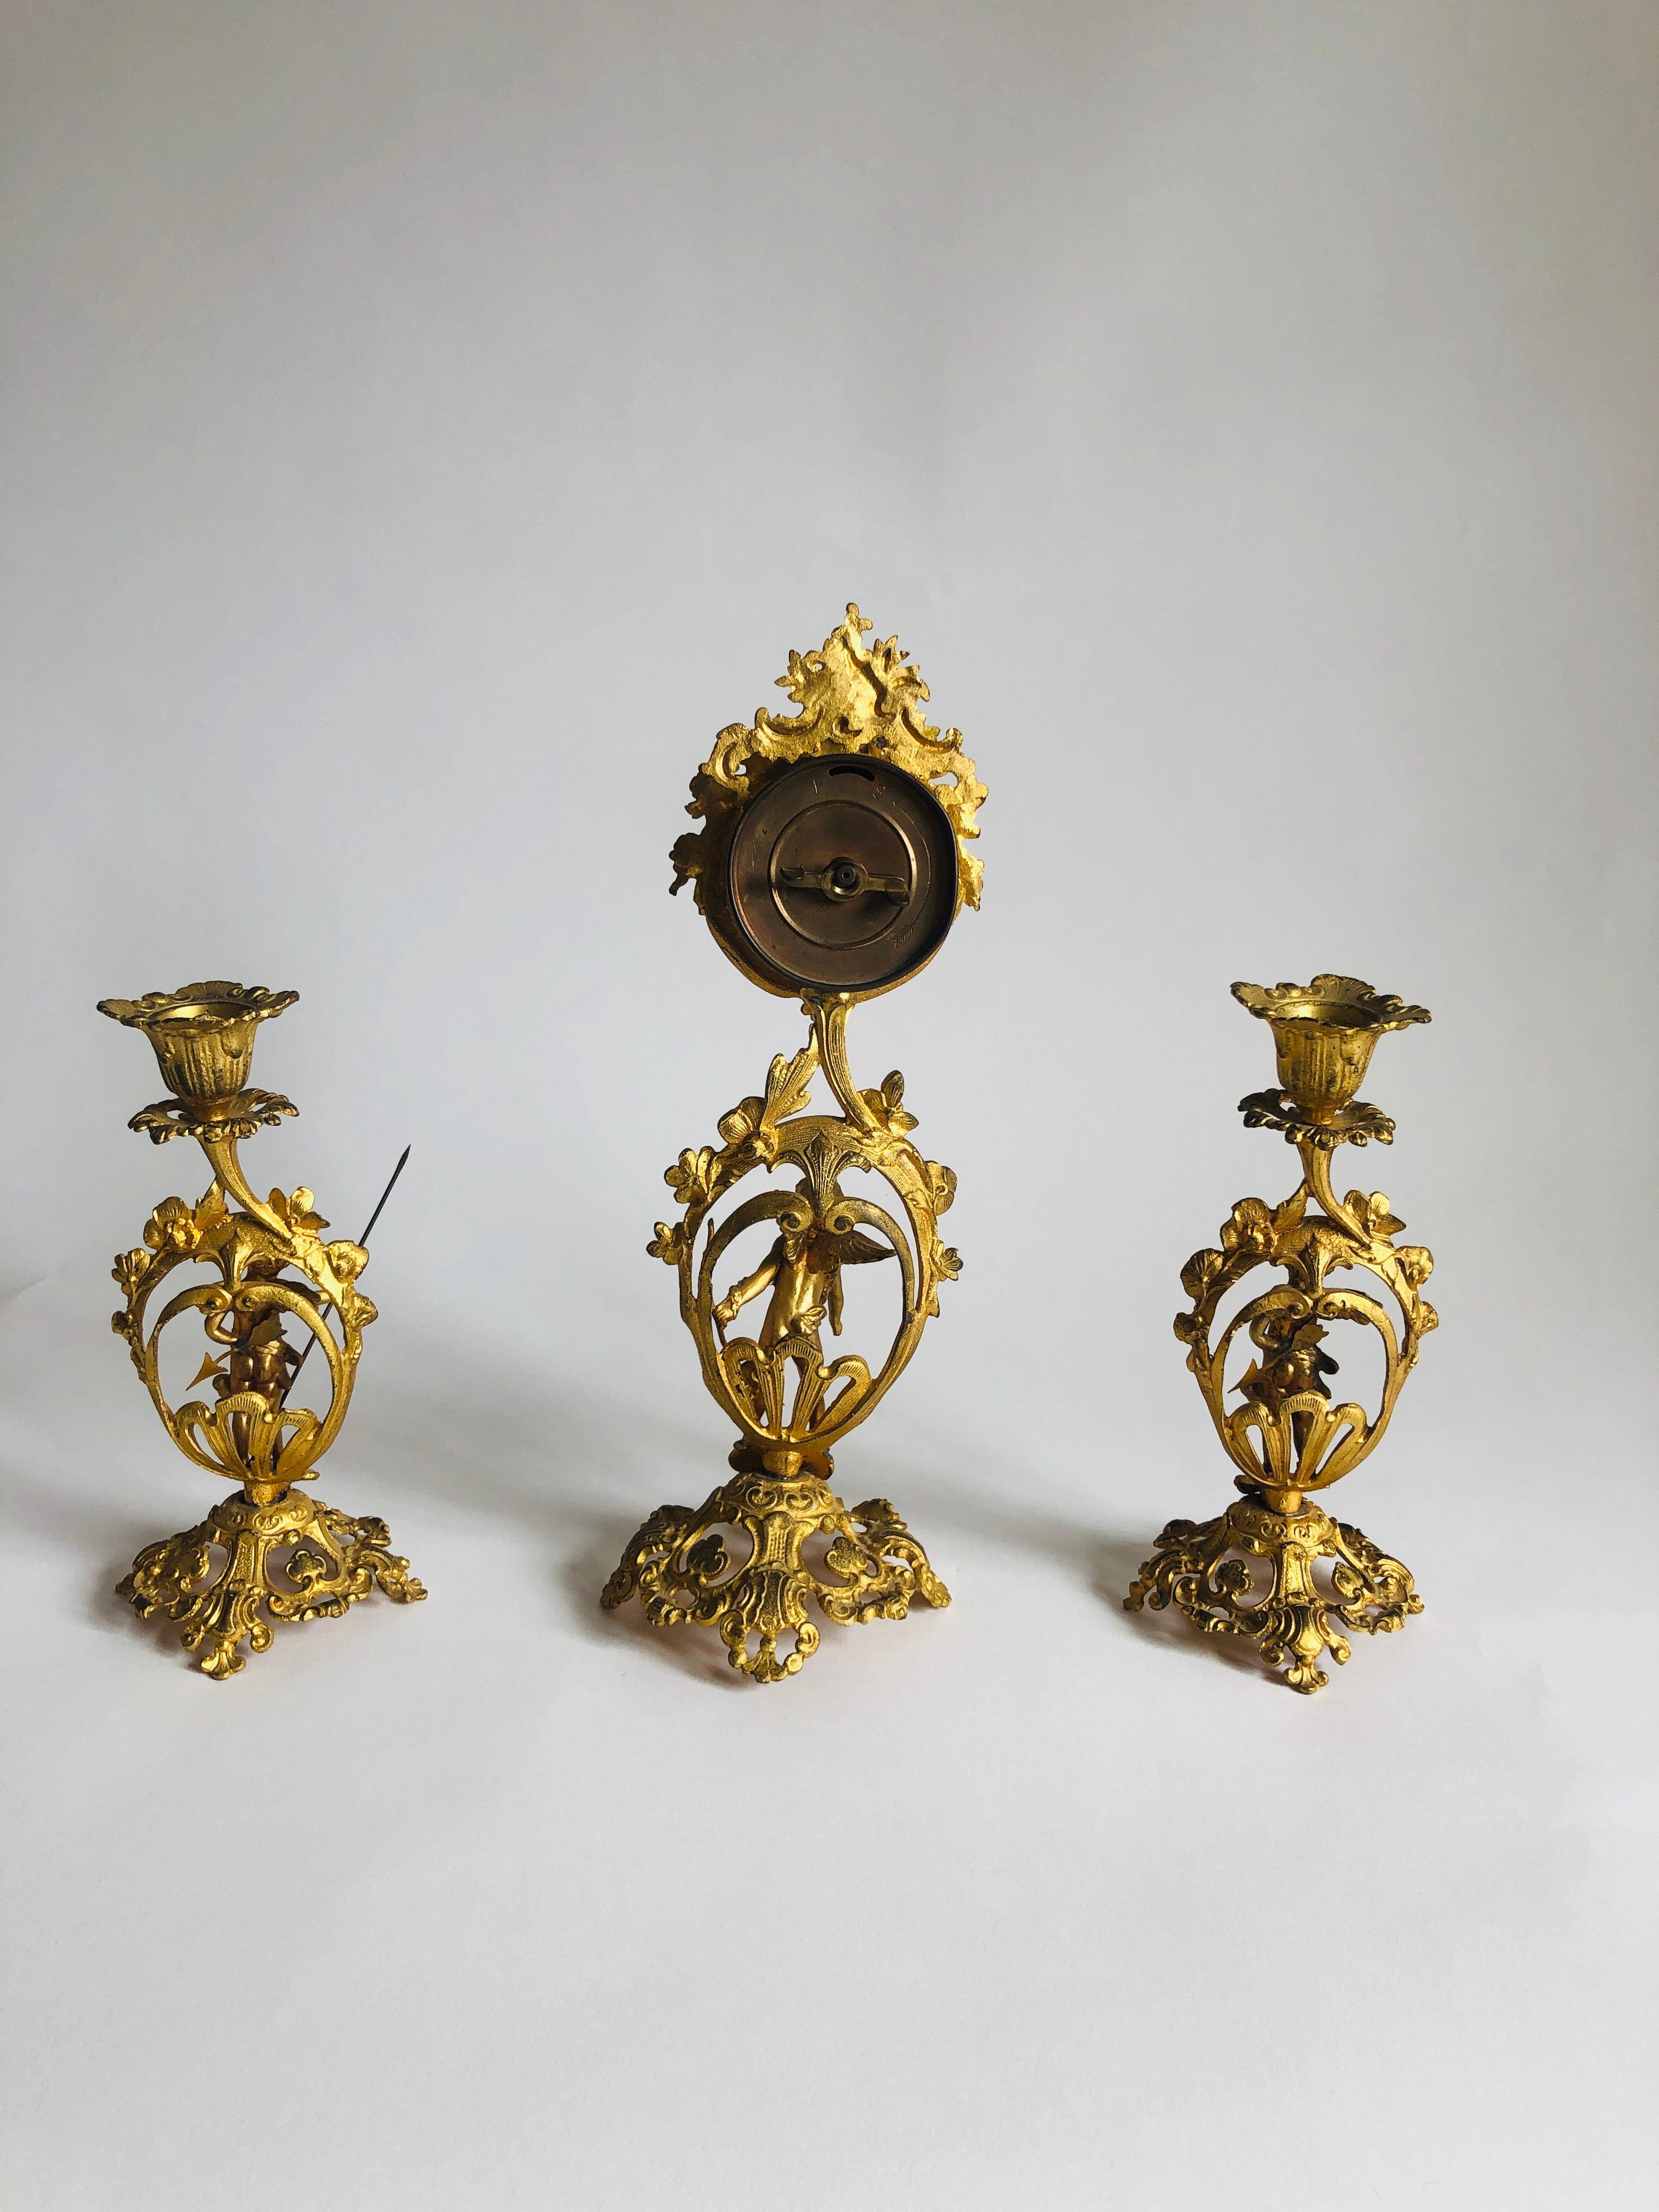 Fine Victorian ornate gilded clock set with delightful ornate cupids and flowers. The clock is an 8 day movement with original hands and a cupid to the base. The candlesticks have attractive shaped tops raised by cupids on an ornate